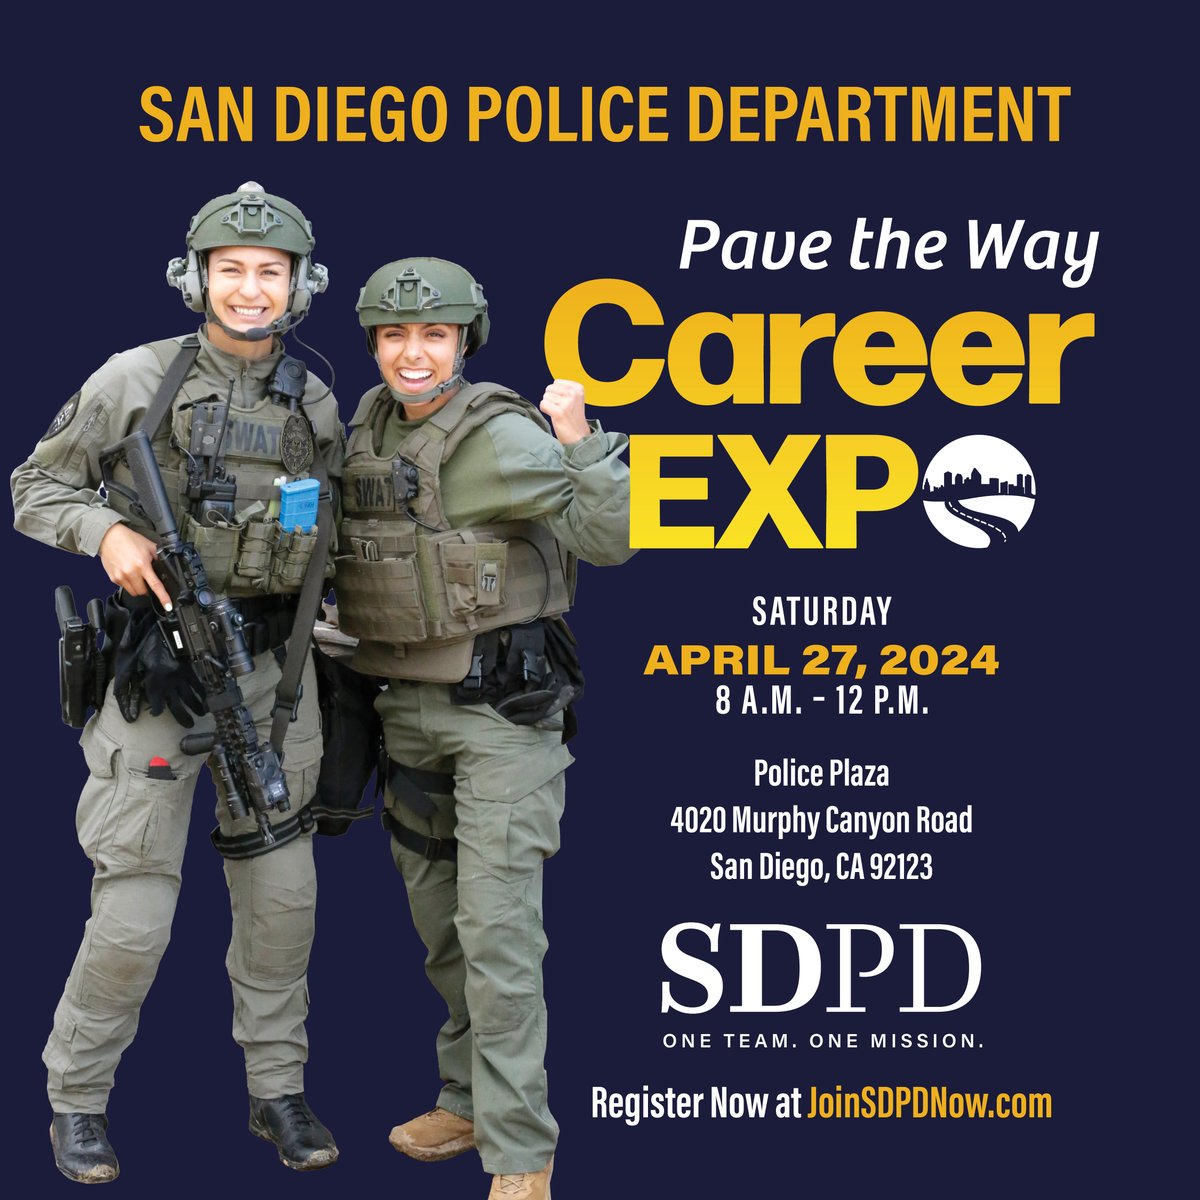 Are you curious about a career in law enforcement or looking for a change? Join us at the San Diego Police Department’s Pave the Way event on Saturday, April 27, 2024, from 8 A.M. to 12 P.M. at Police Plaza, 4020 Murphy Canyon Road.